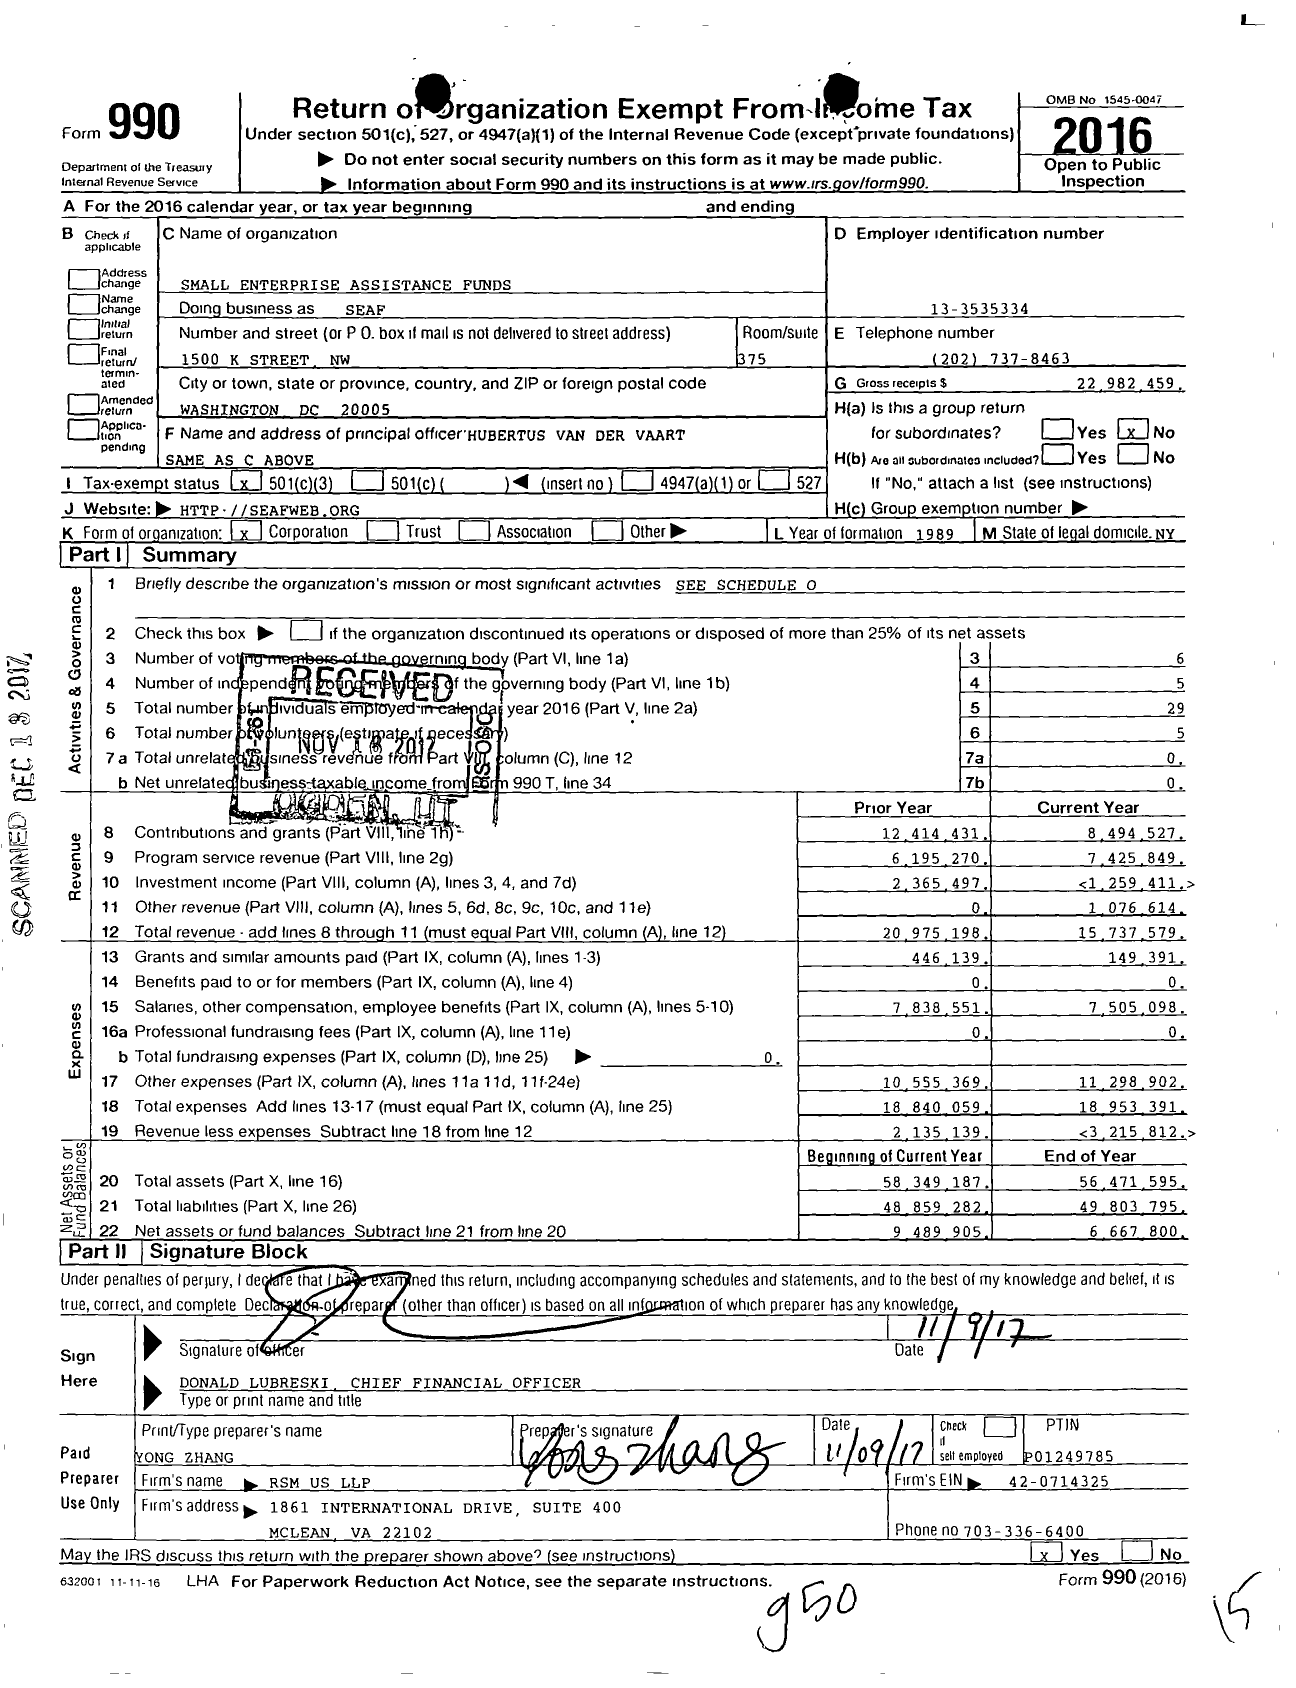 Image of first page of 2016 Form 990 for Small Enterprise Assistance Funds (SEAF)